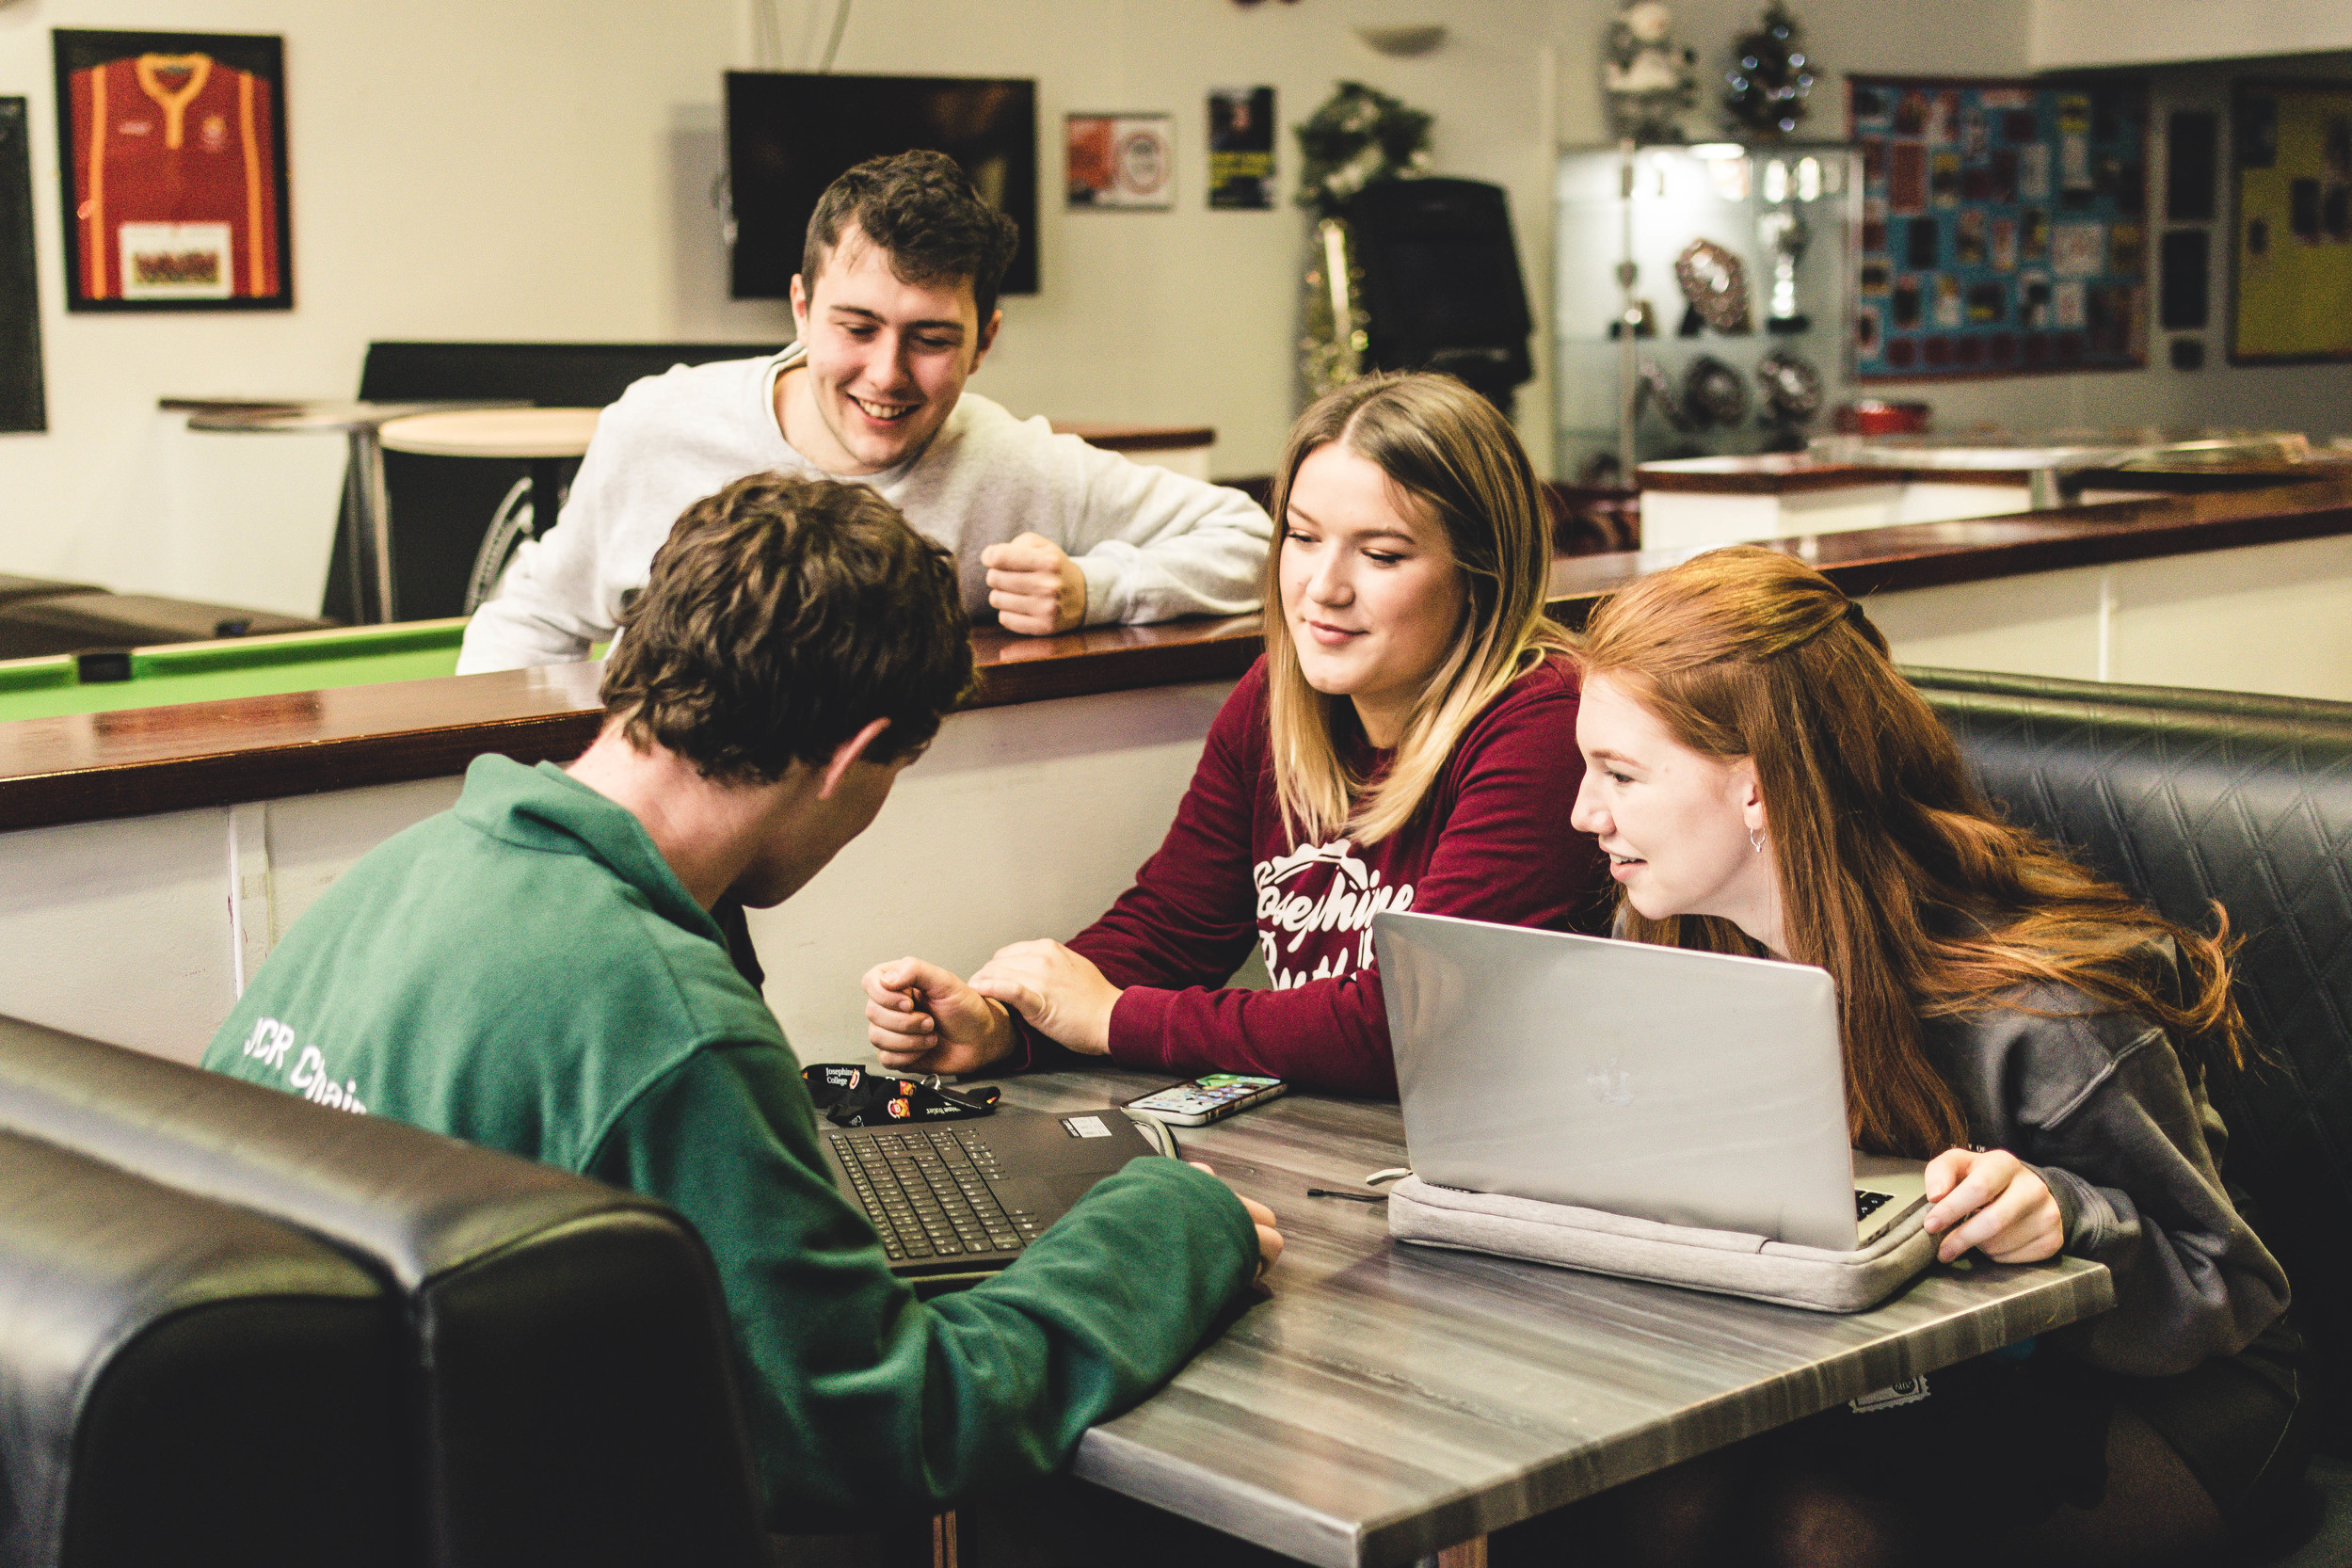 Students working in a group on laptops in the common room